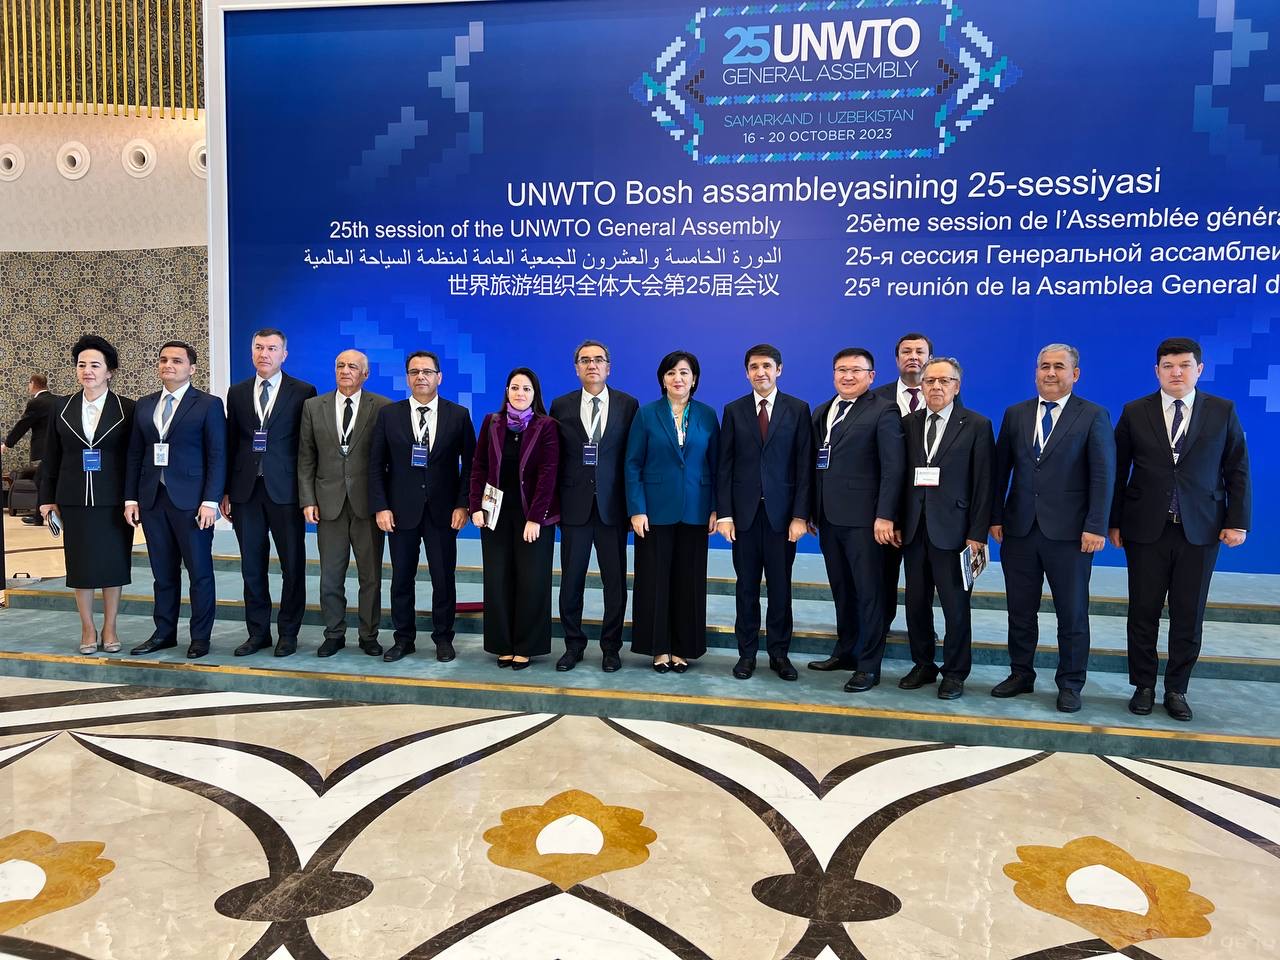 Uzbekistan hosts Global Educational Forum, welcoming 1,200 experts from 30 countries at UNWTO's 25th General Assembly 